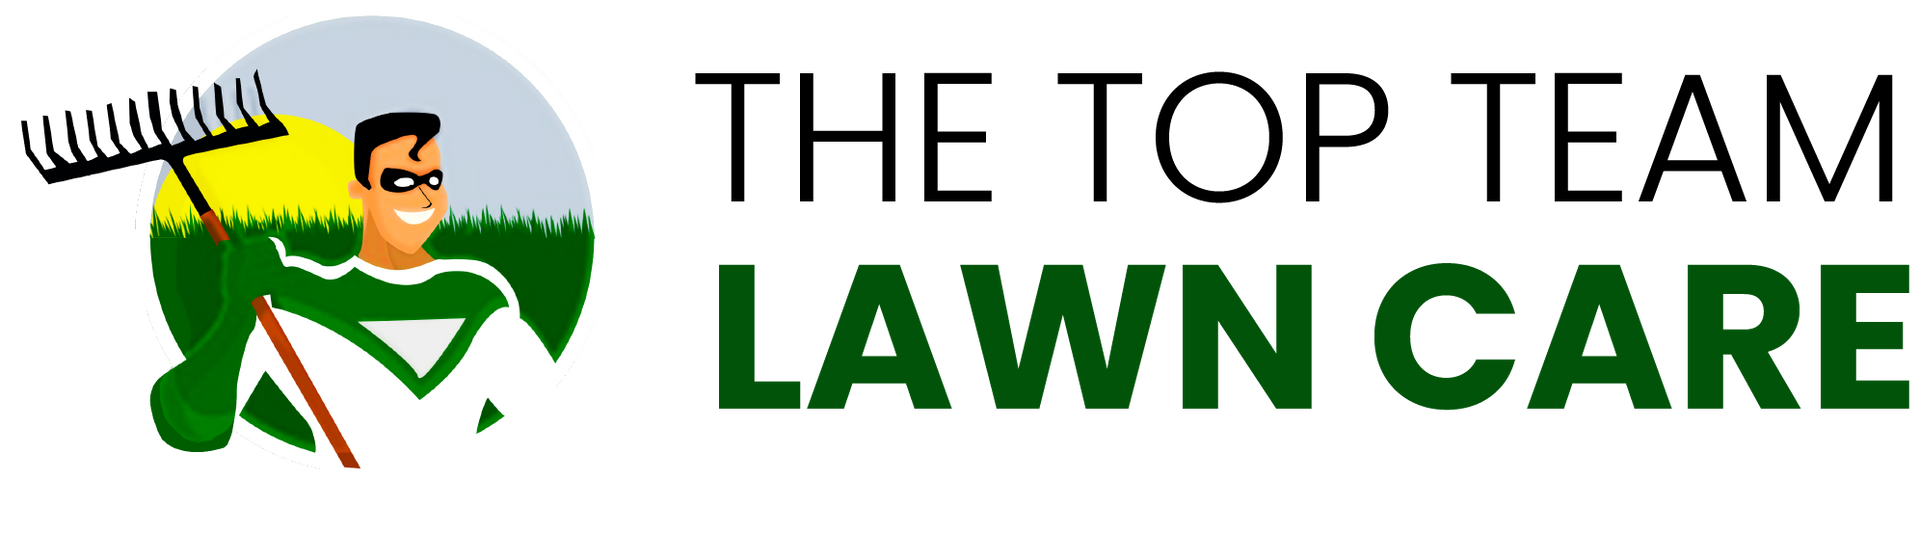 The Top Team Lawn Care